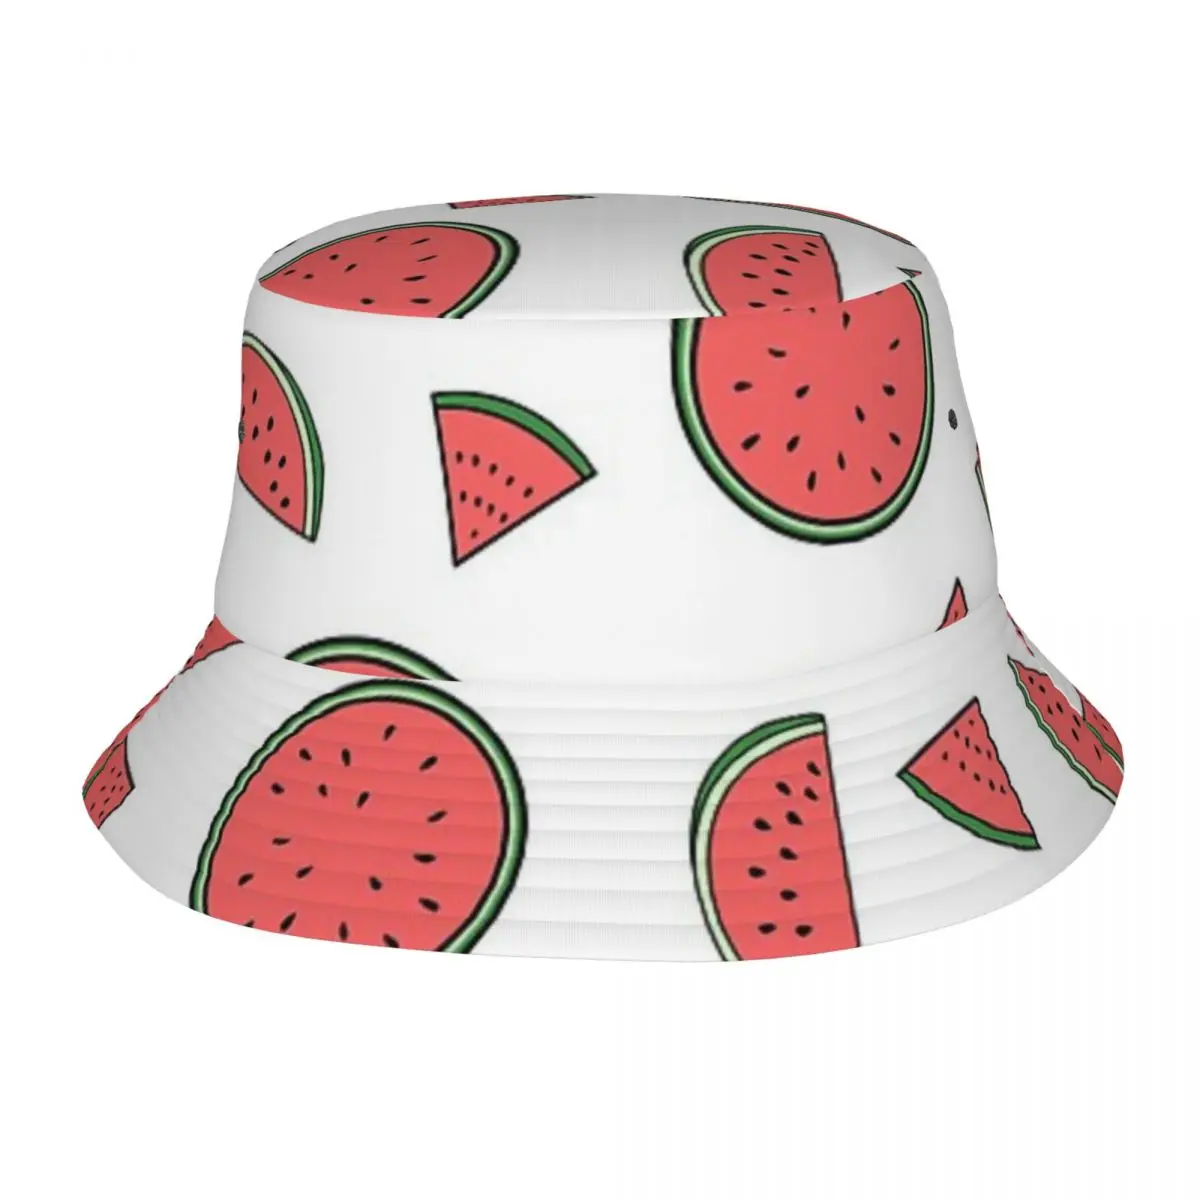 

Cute Watermelon Slices Bucket Hat Panama For Man Woman Bob Hats Outdoor Reversible Fisherman Hats For Summer Fishing Unisex Caps